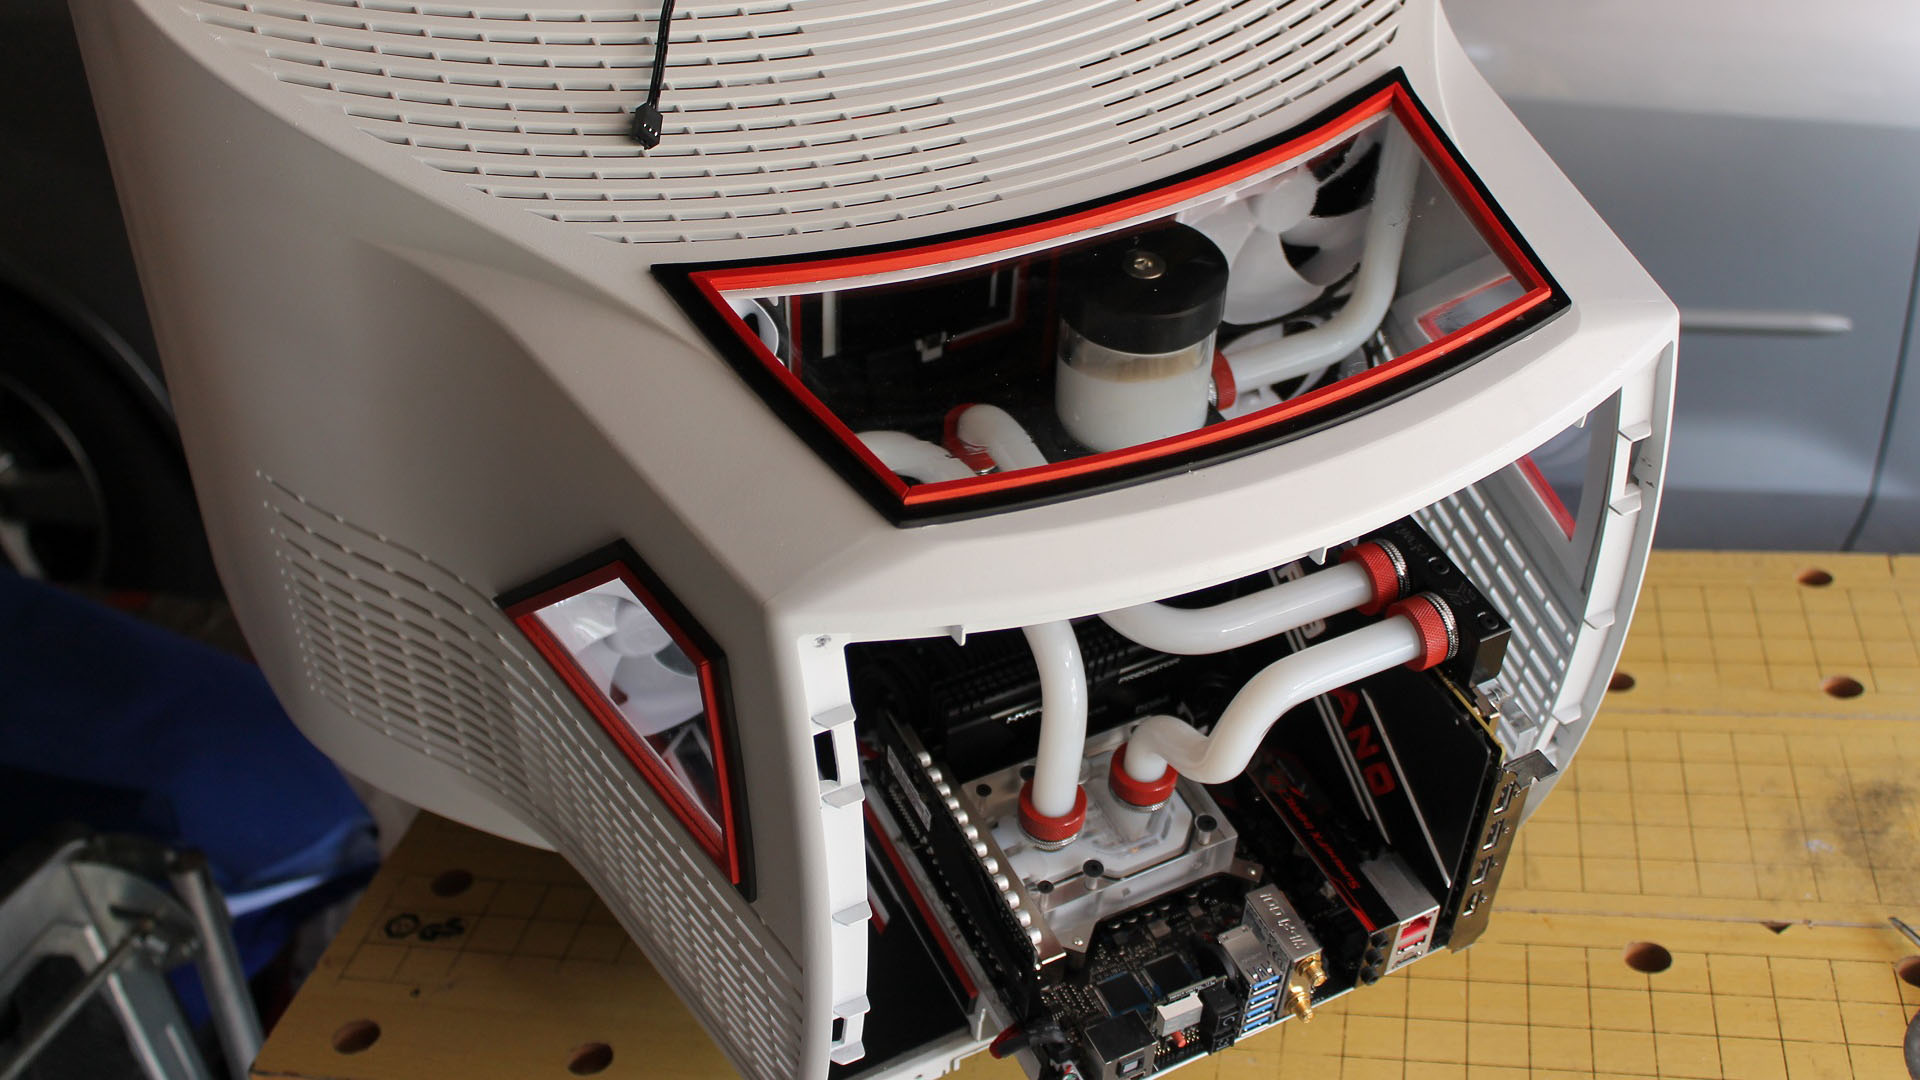 Inside the gaming PC that sits inside the CRT monitor